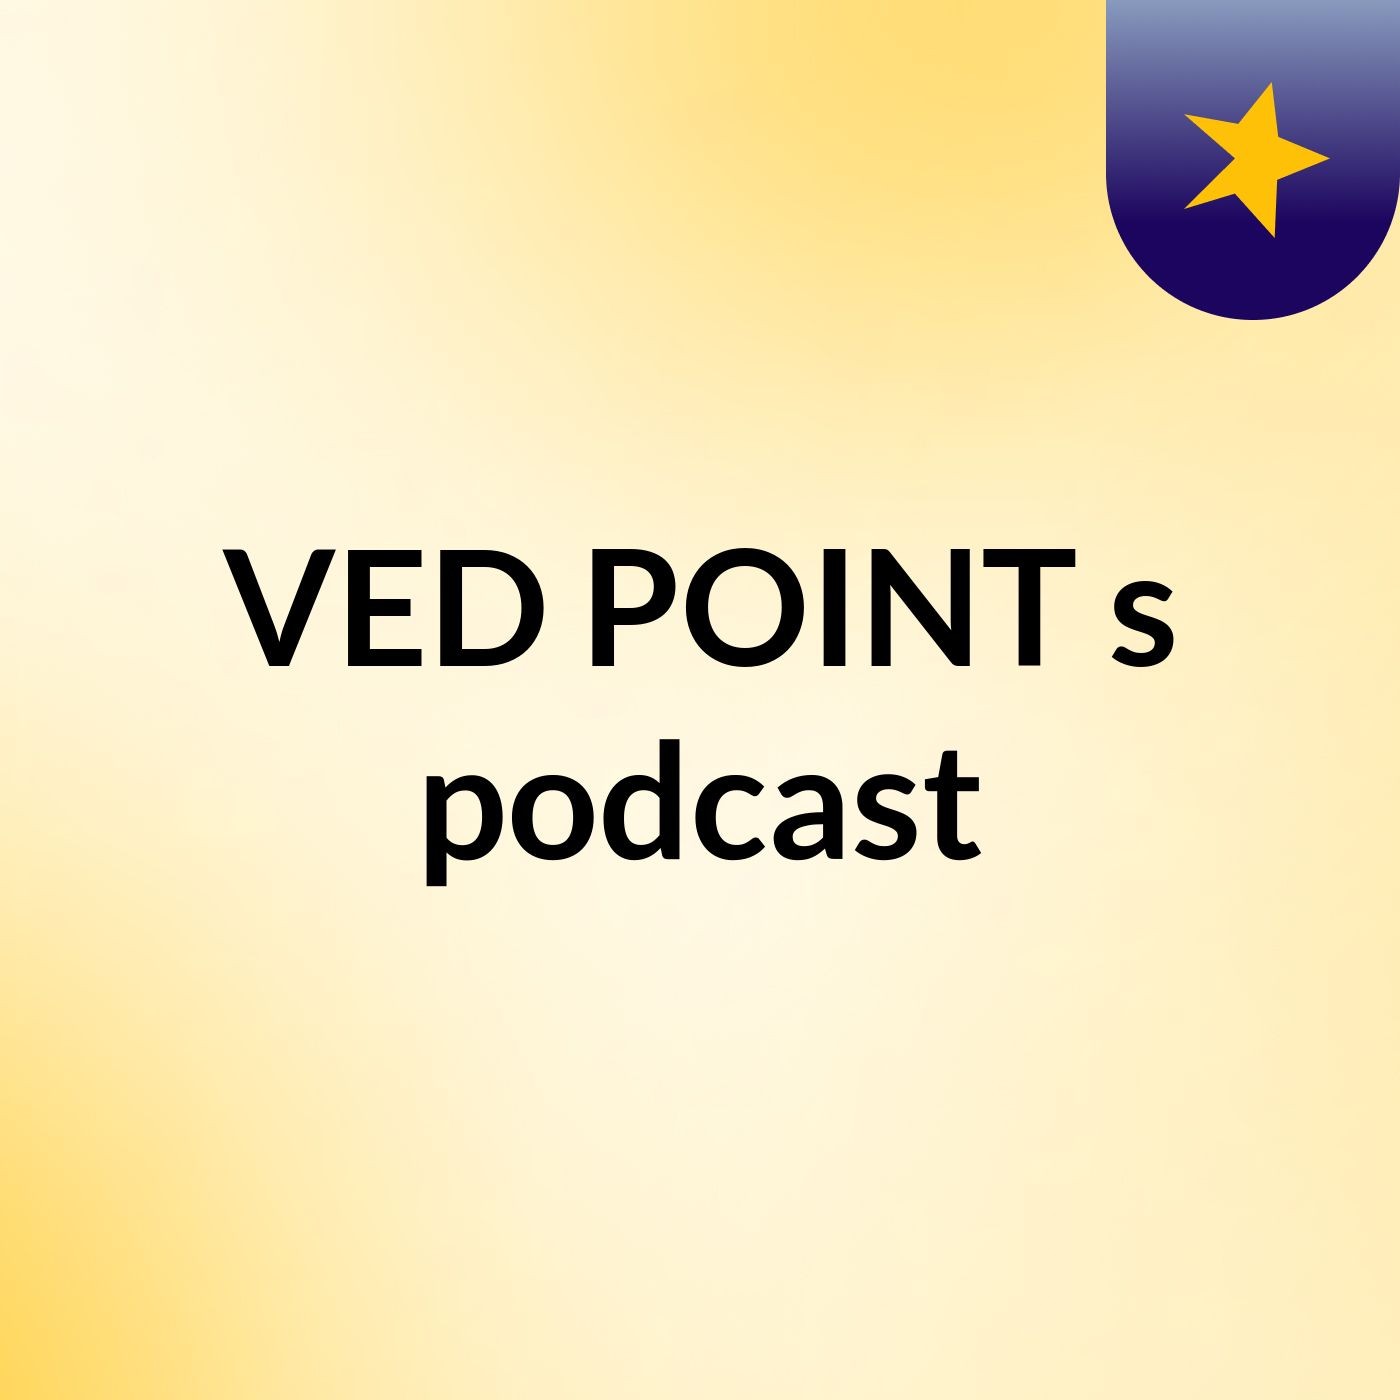 VED POINT's podcast